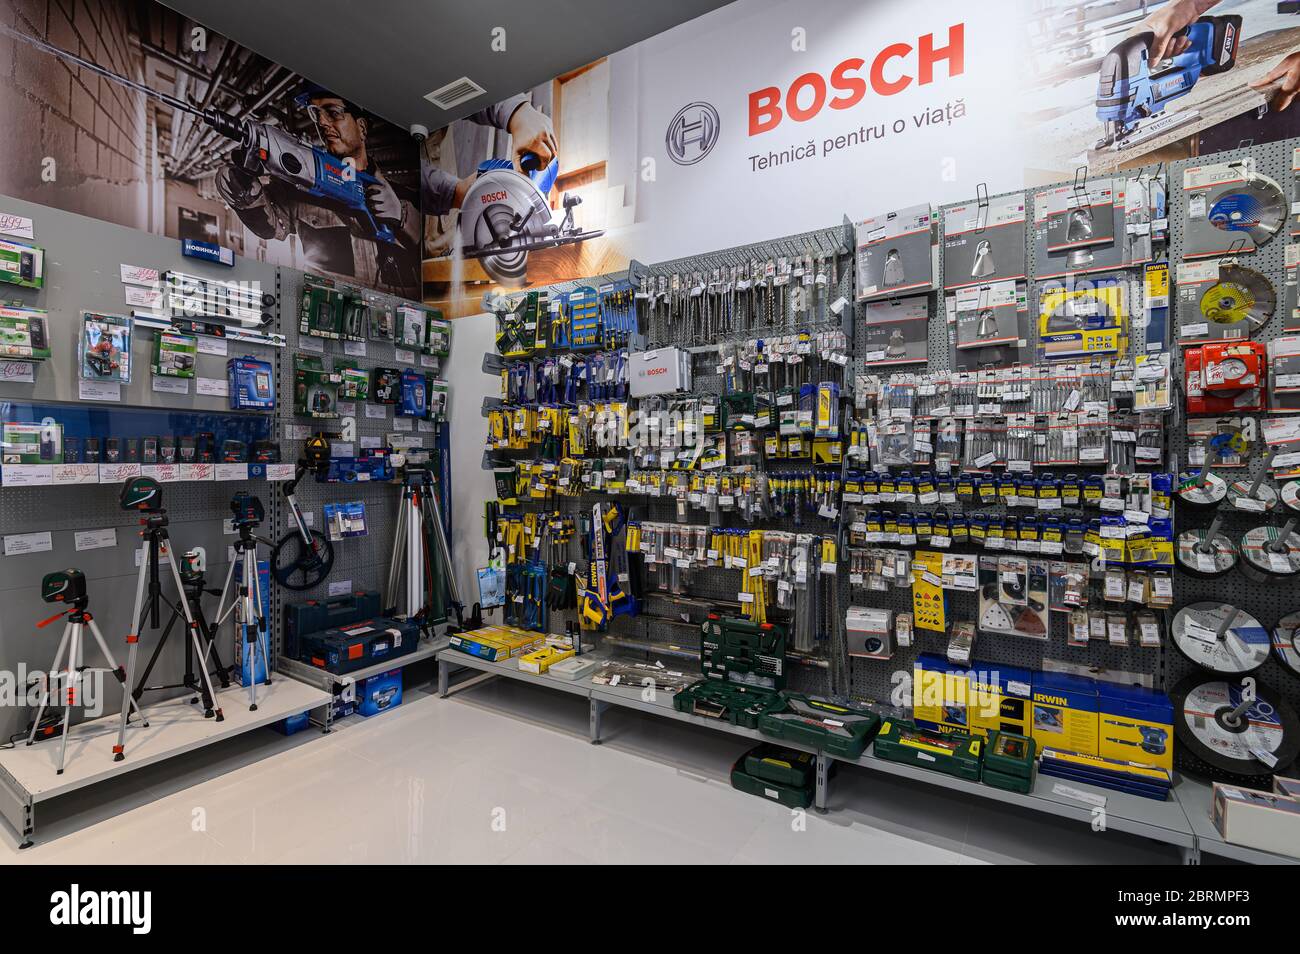 Shelves in a DIY shop with variety of power tools, mostly from the Bosch brand Stock Photo